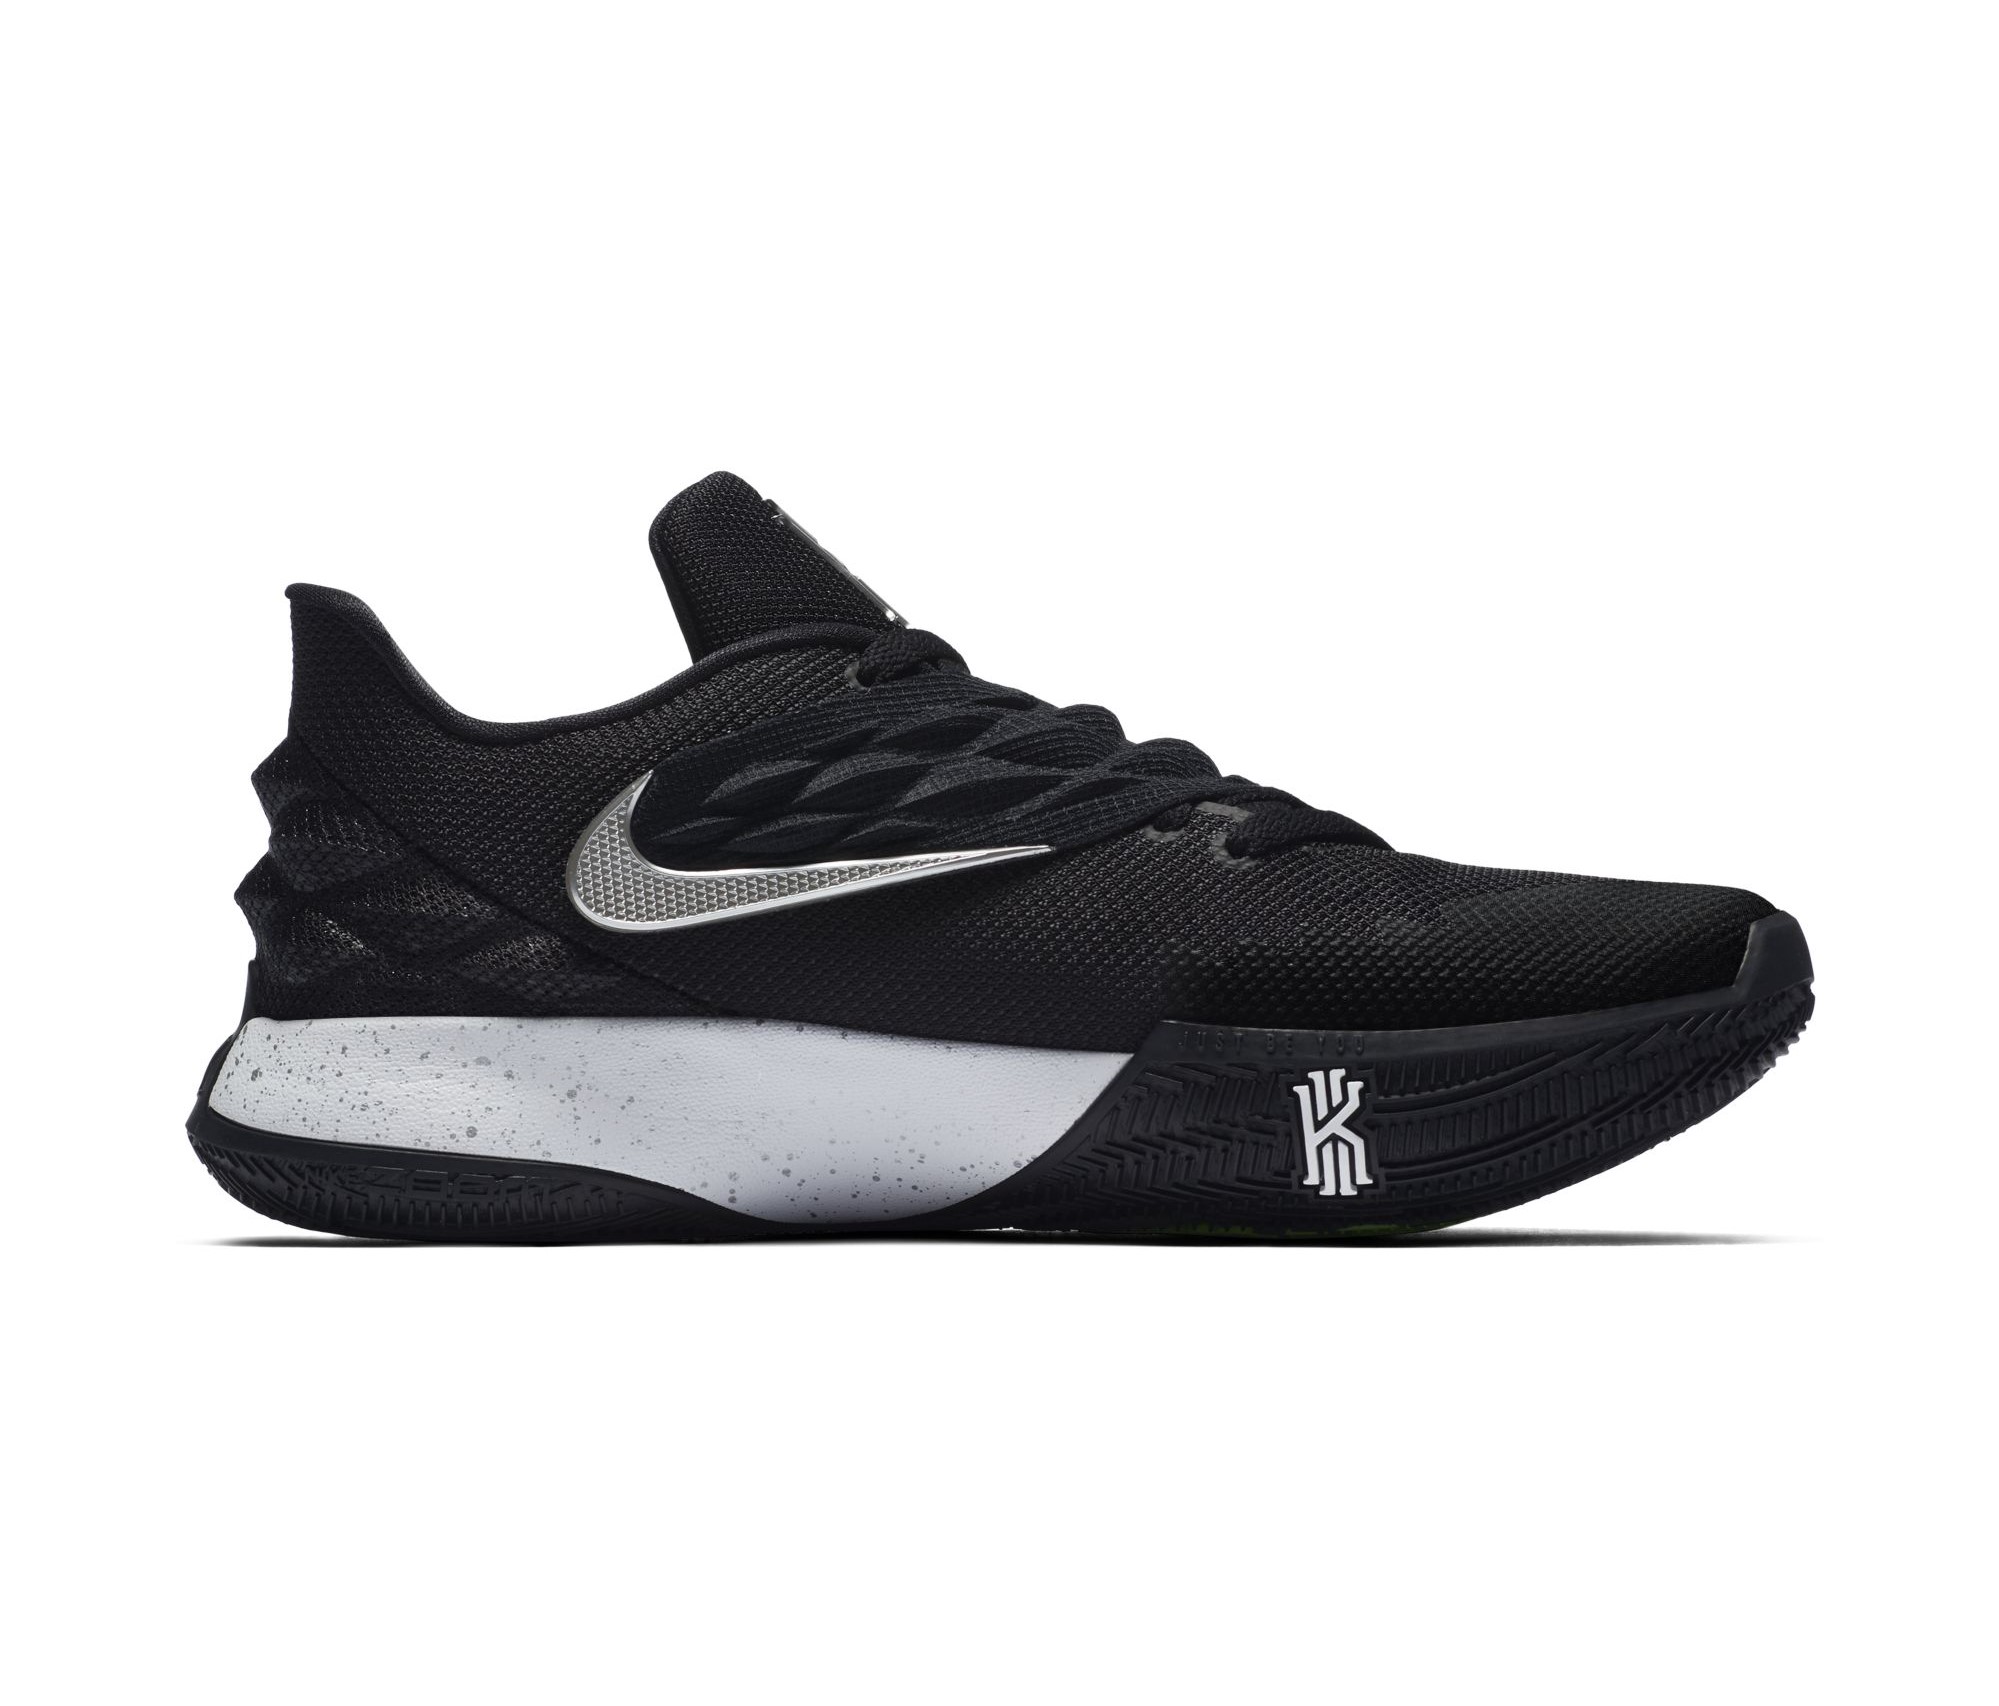 The Nike Kyrie 4 Low is Clean in Black and White - WearTesters1999 x 1706